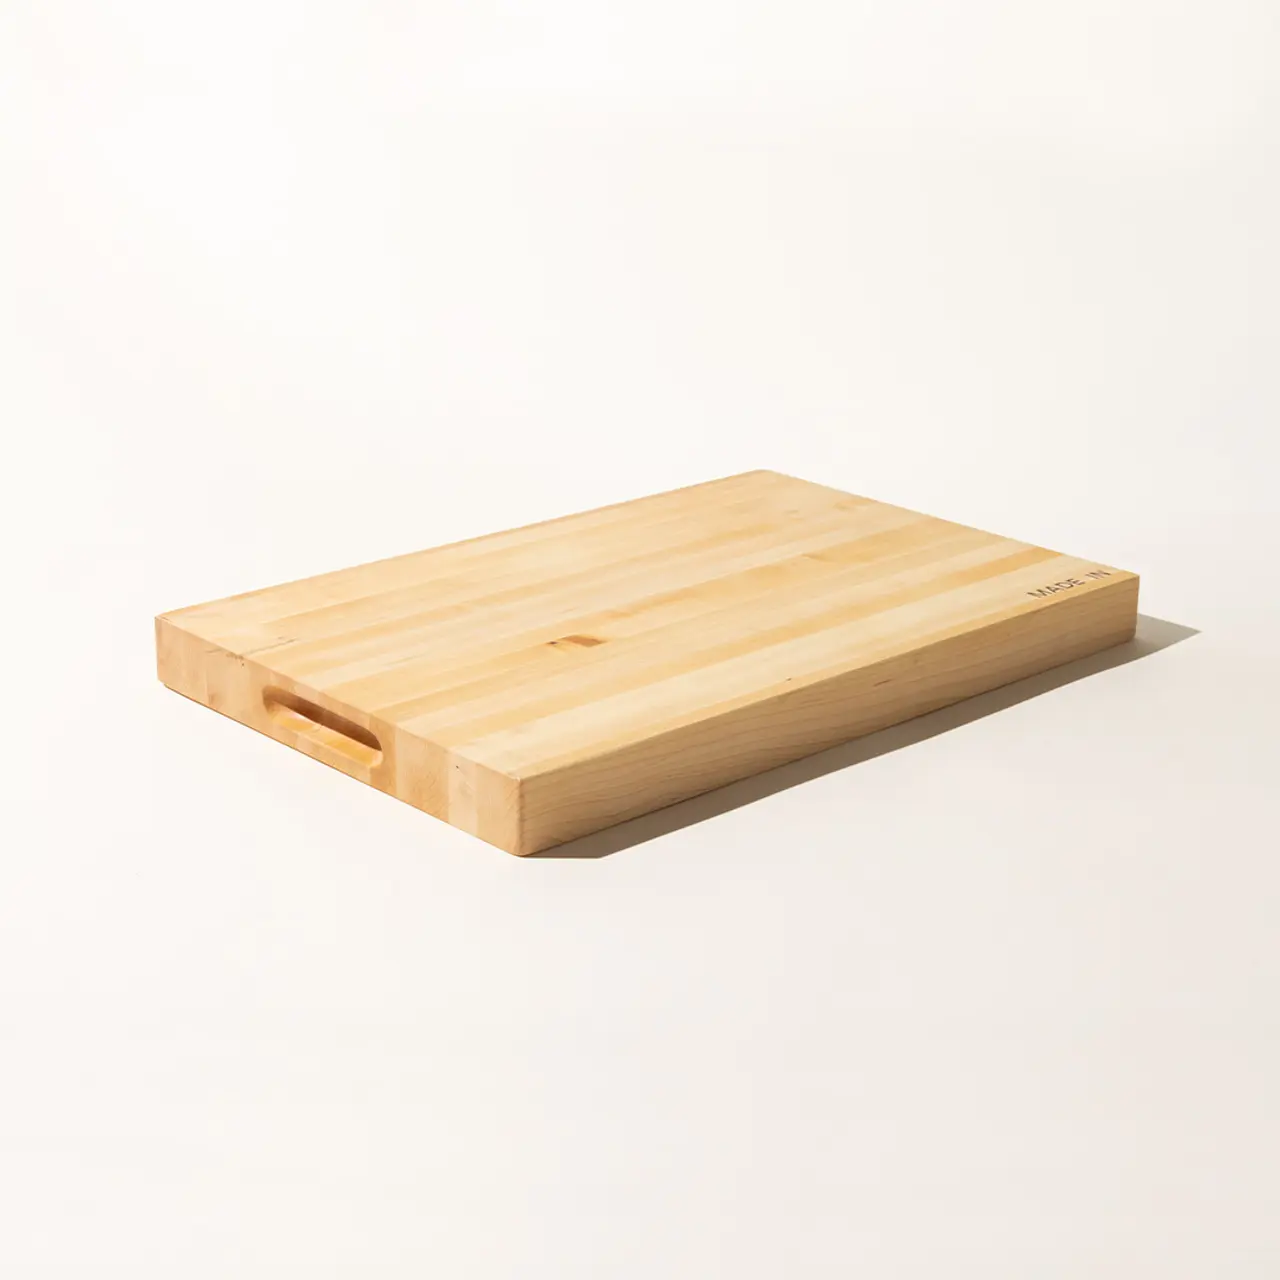 A wooden cutting board with a handle notch is isolated against a white background.